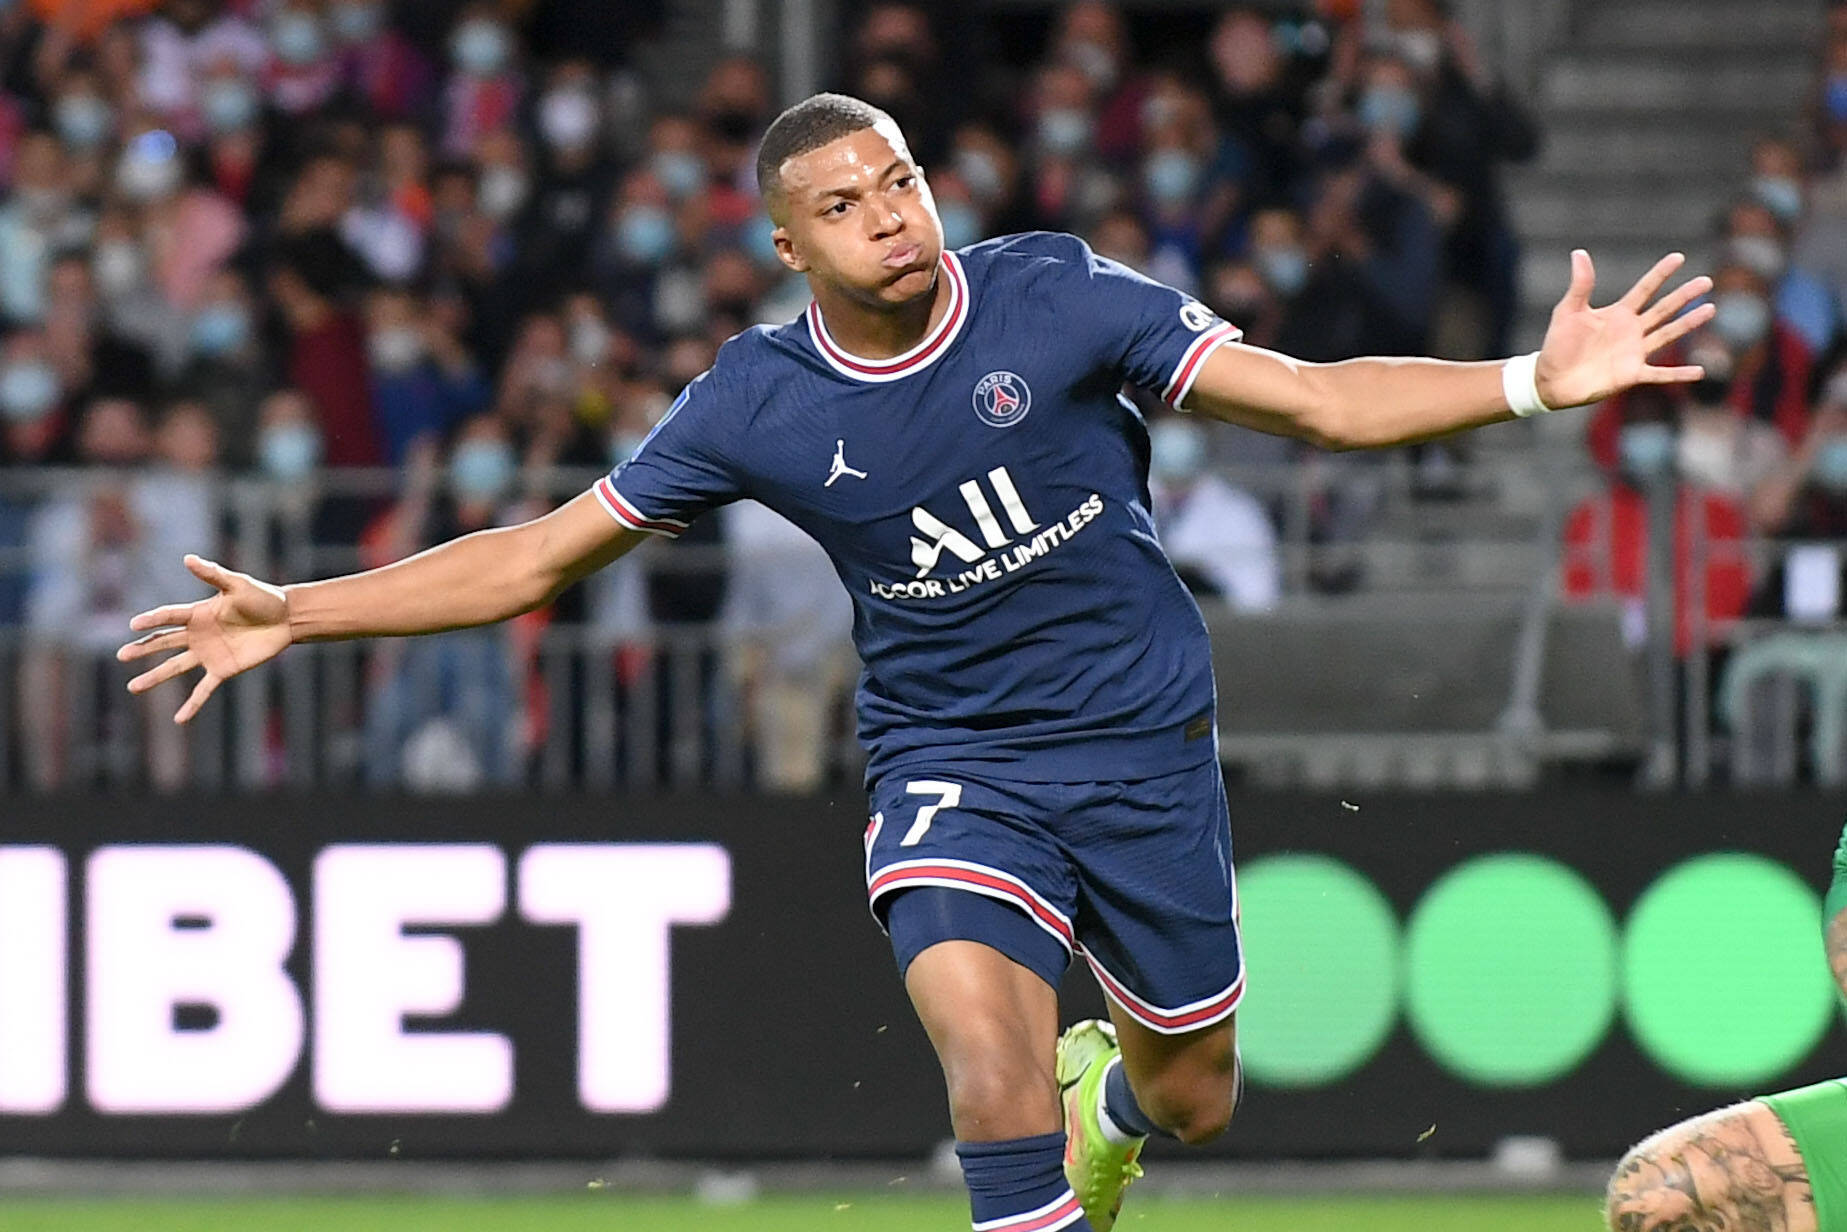 Report: PSG Sets Stance on Mbappe’s Future With the Club Amid Real Madrid Links